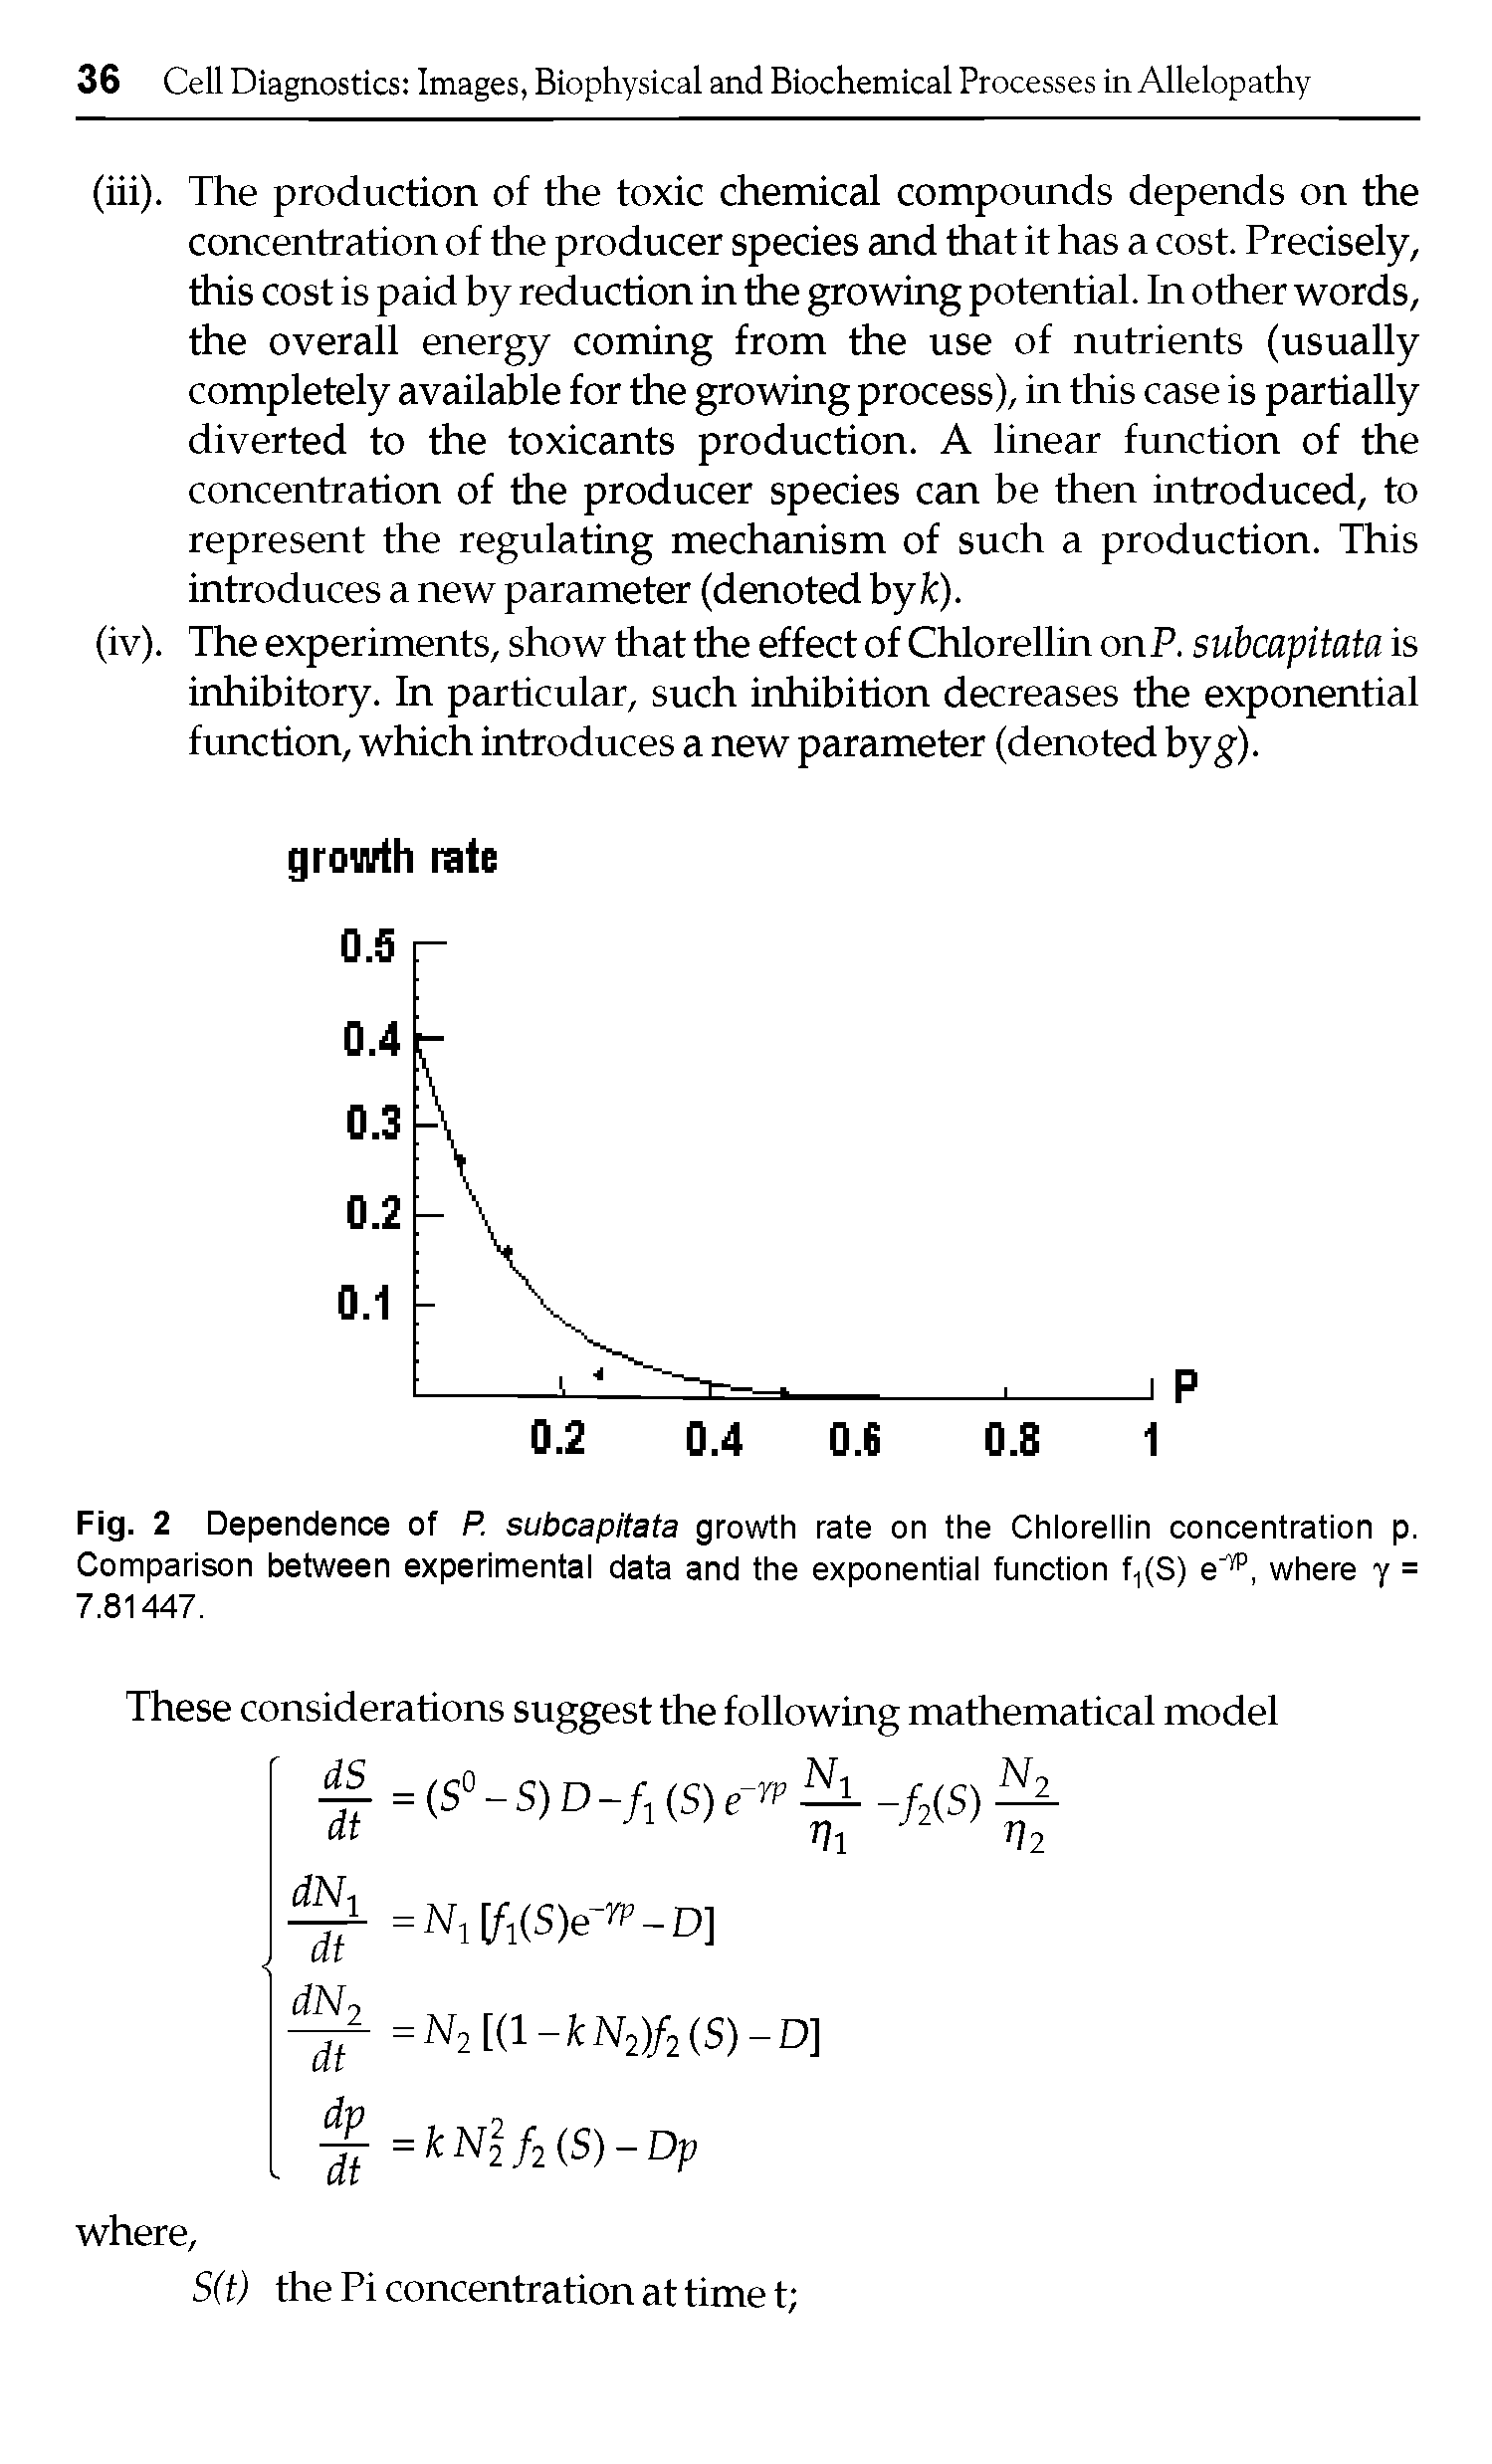 Fig. 2 Dependence of P. subcapitata growth rate on the Chlorellin concentration p. Comparison between experimental data and the exponential function f,(S) e, where y = 7.81447.